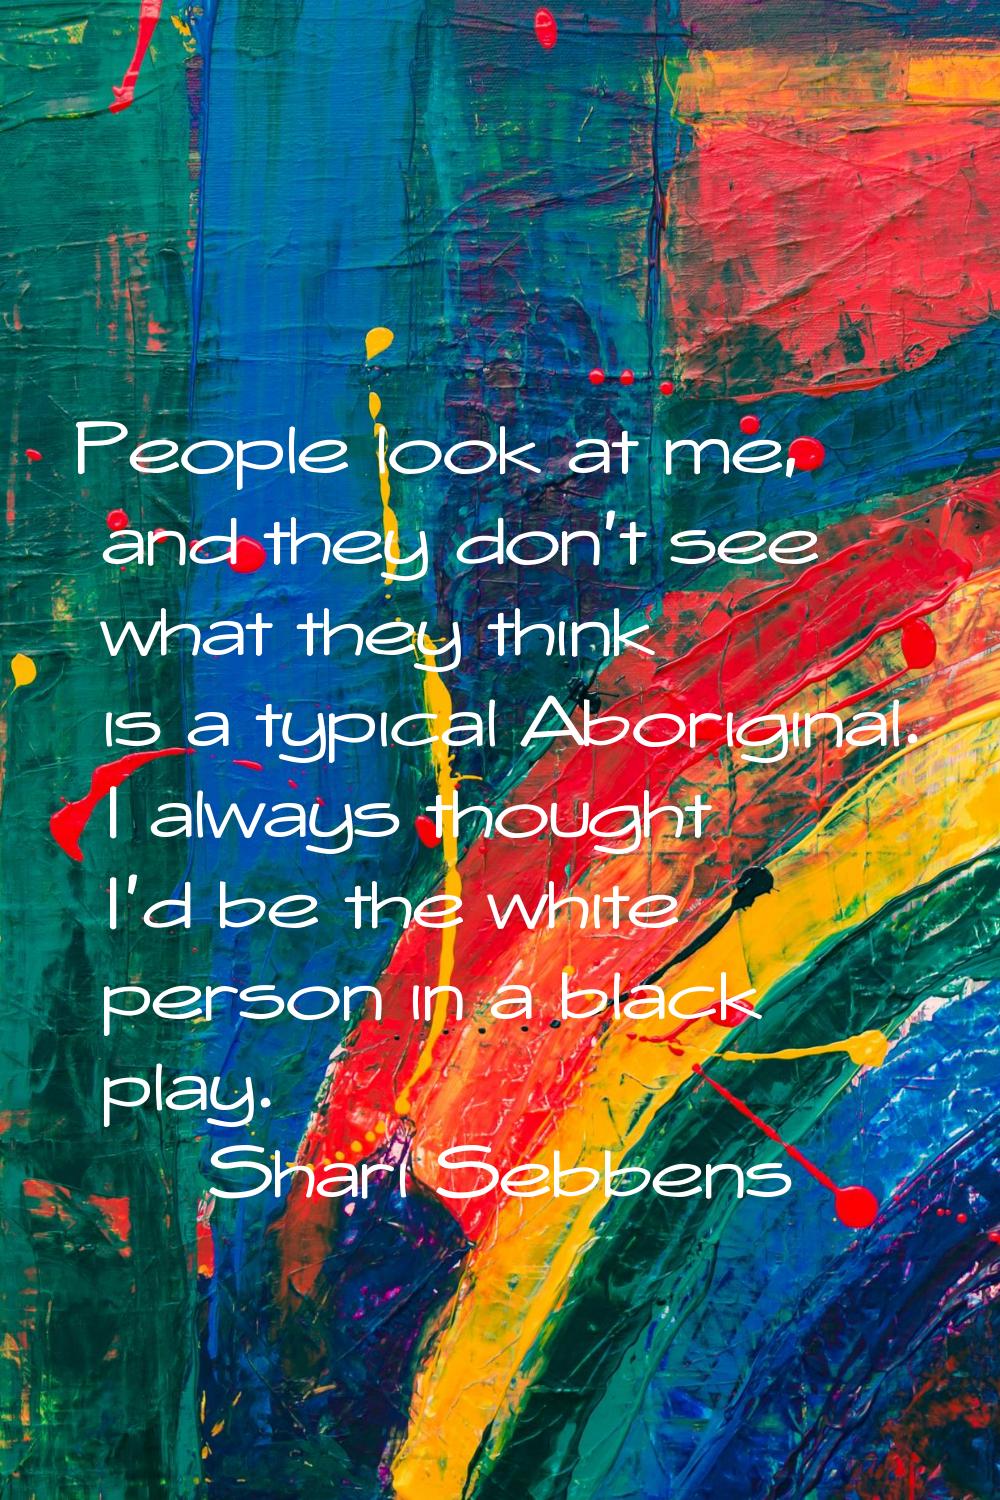 People look at me, and they don't see what they think is a typical Aboriginal. I always thought I'd